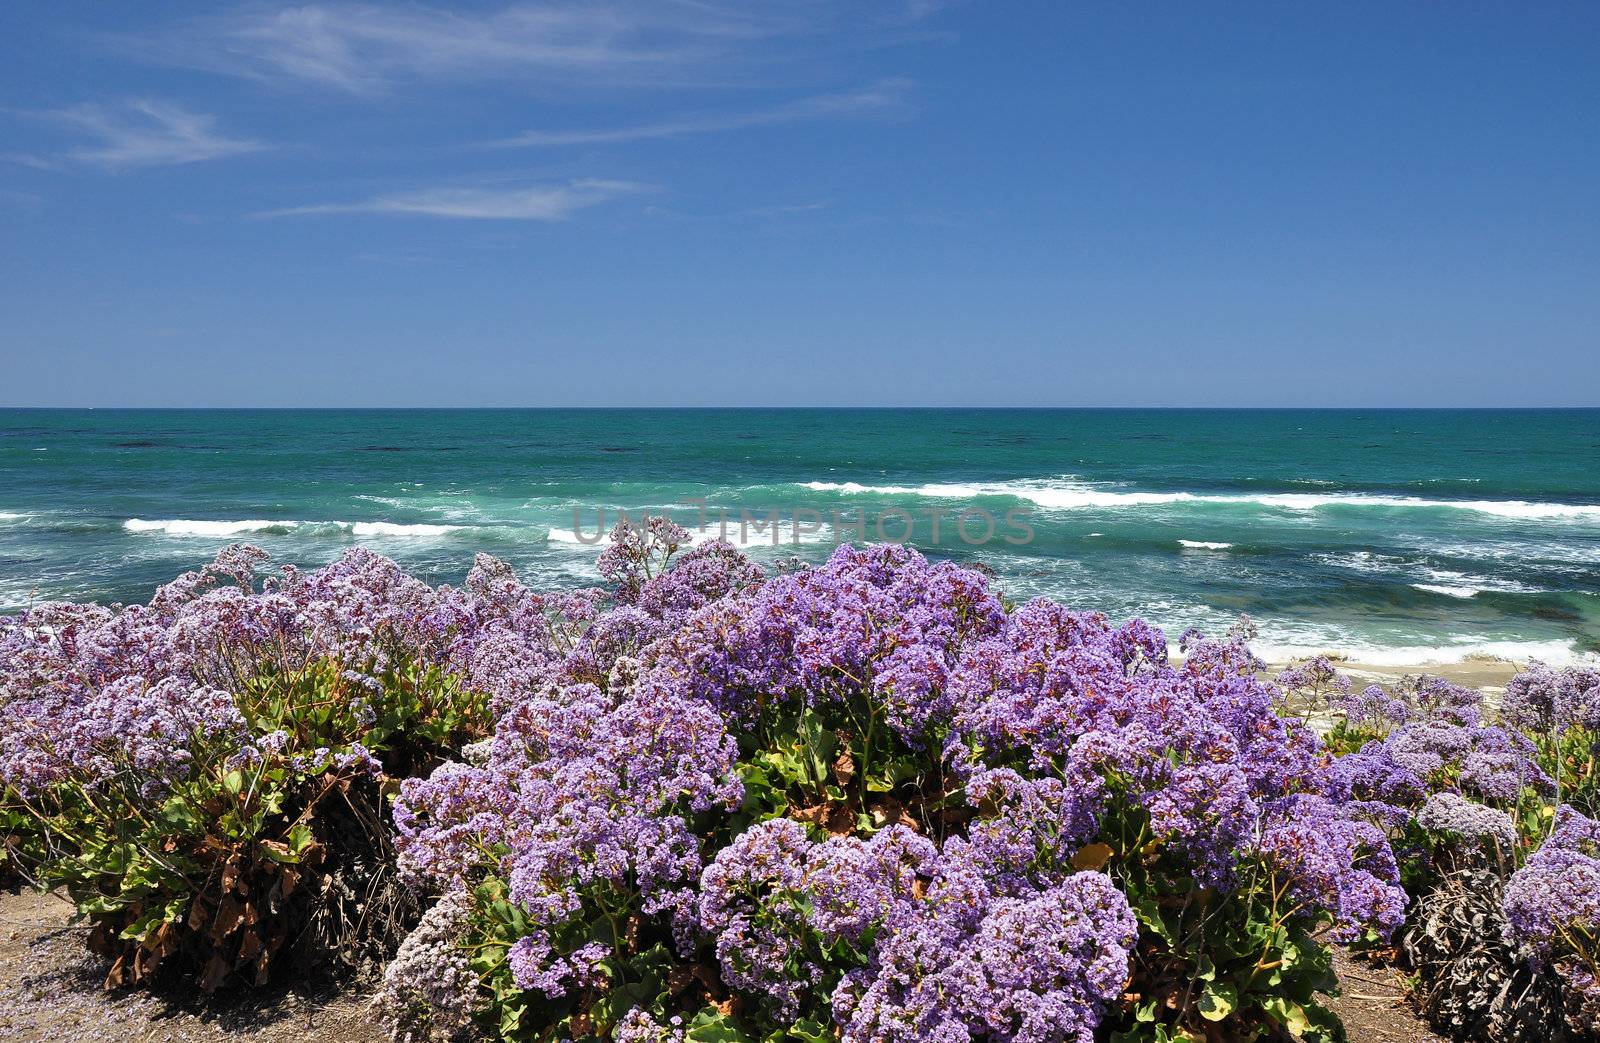 Colorful flowers grow along the coastline of La Jolla in Southern California.